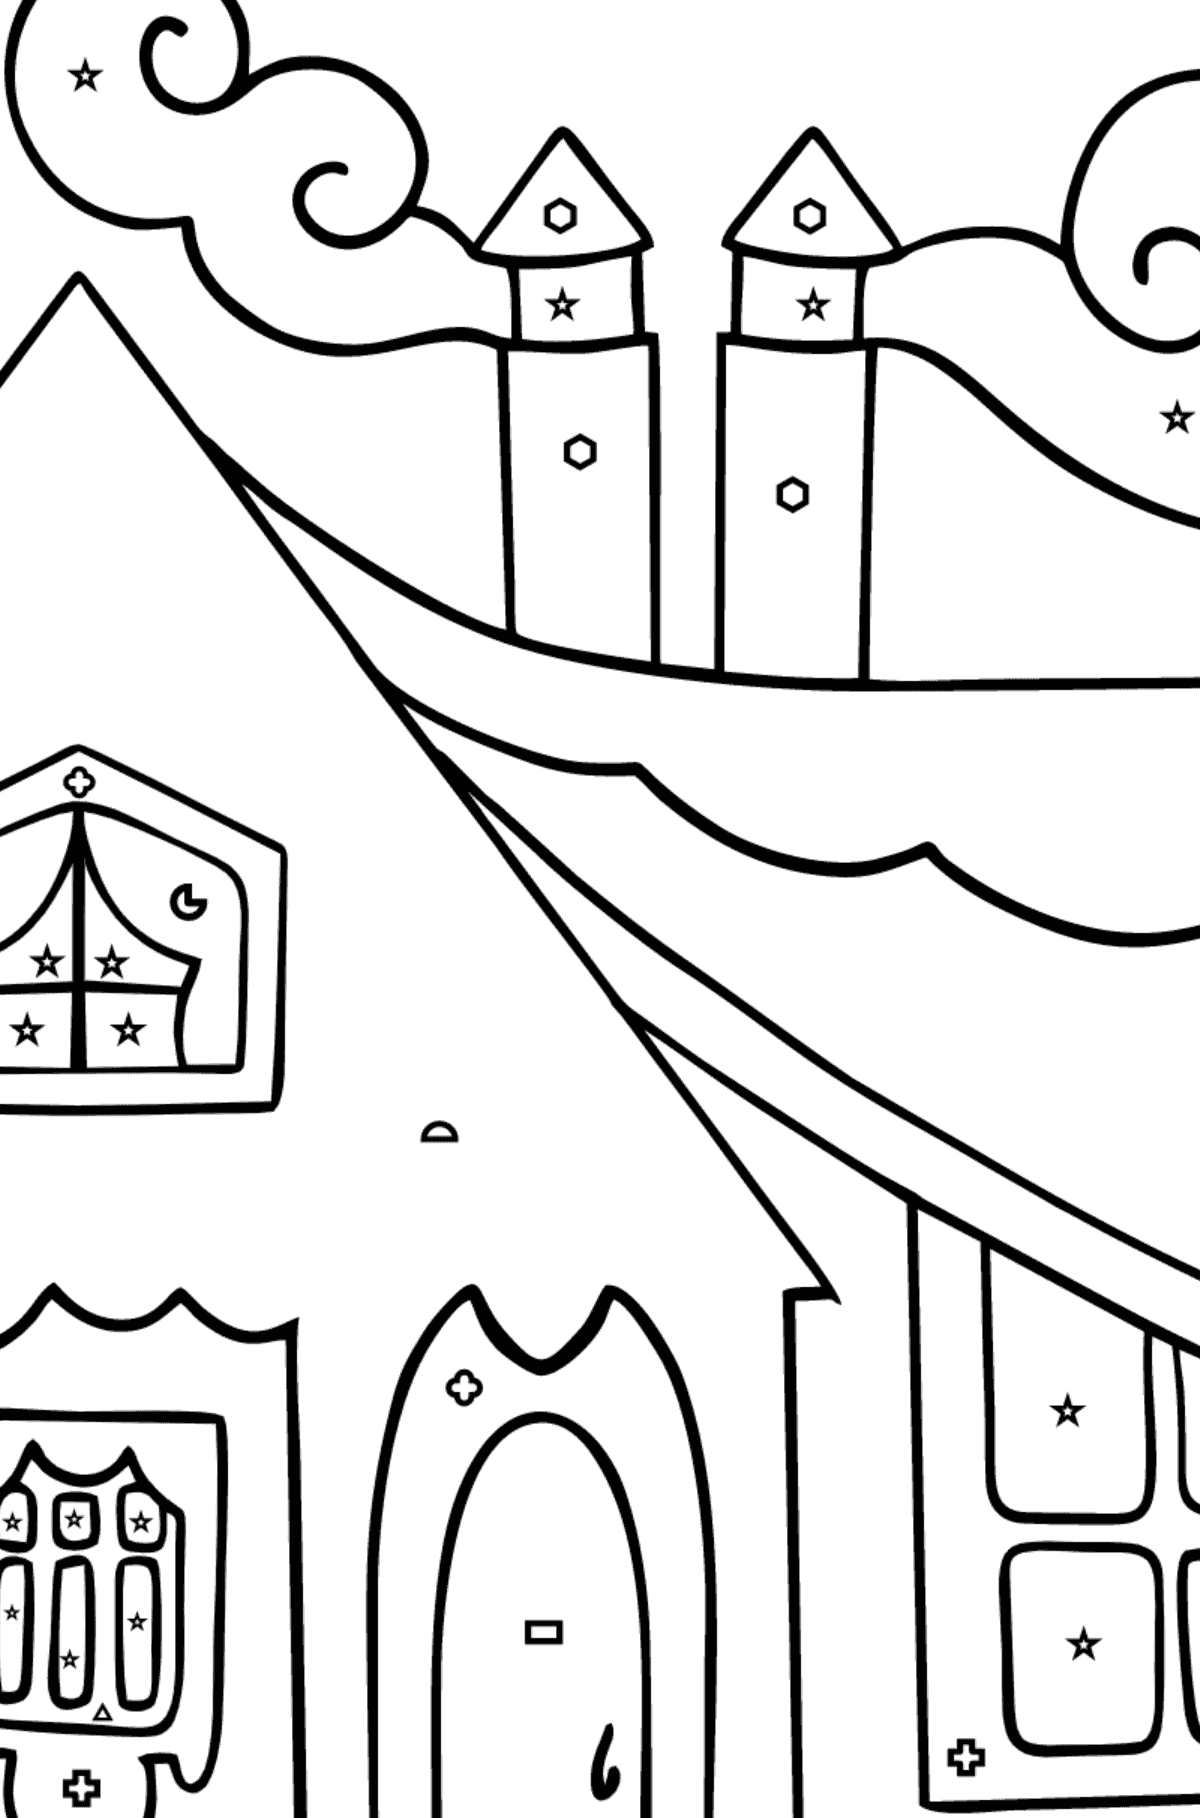 Simple Coloring Page - A Tiny House for Kids  - Color by Geometric Shapes